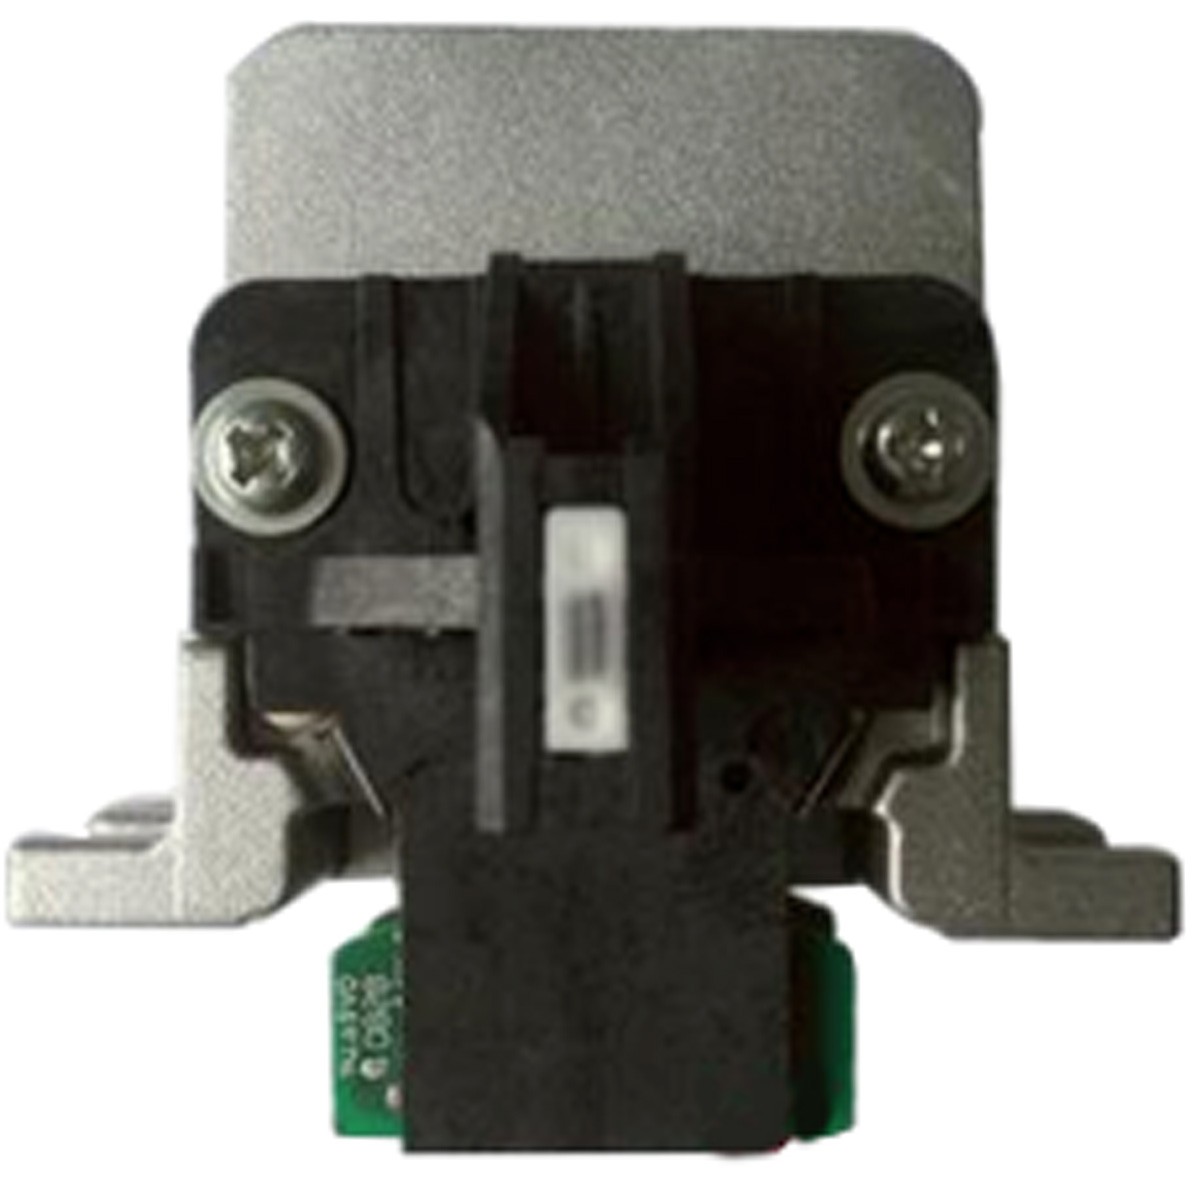 New compatible print head for Epson 1600K3H - Click Image to Close